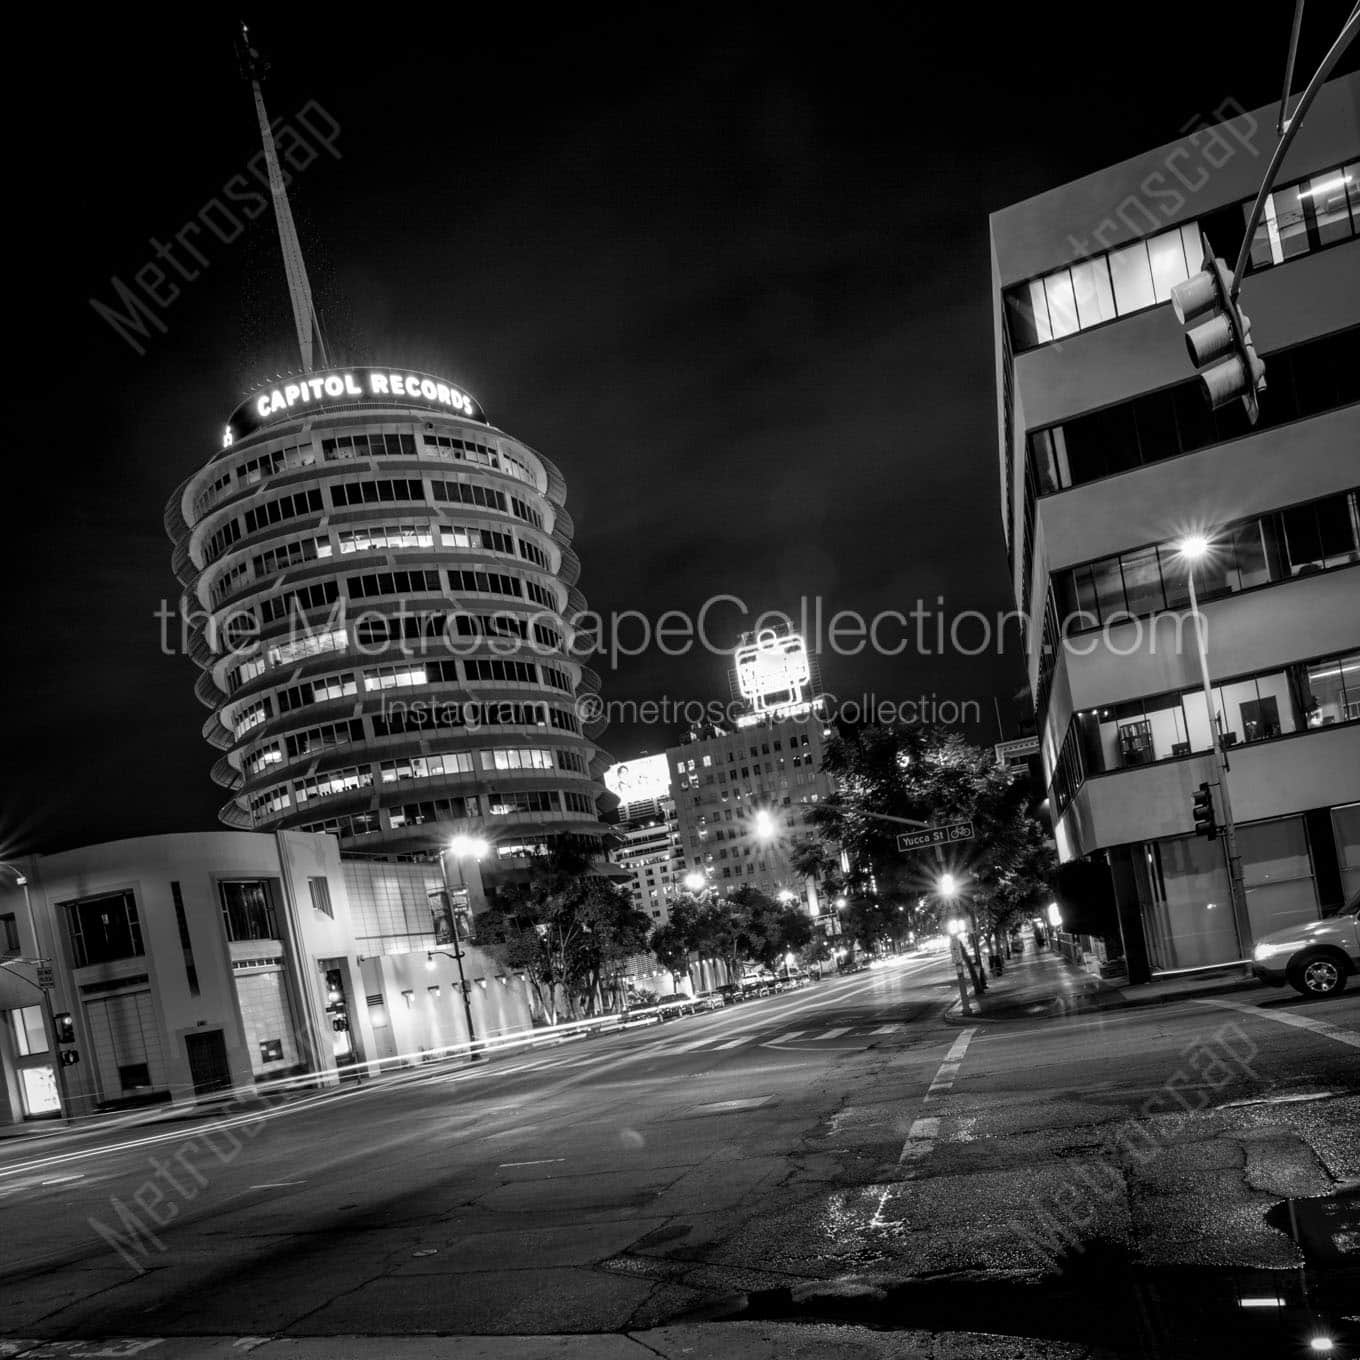 capitol records tower at night Black & White Office Art